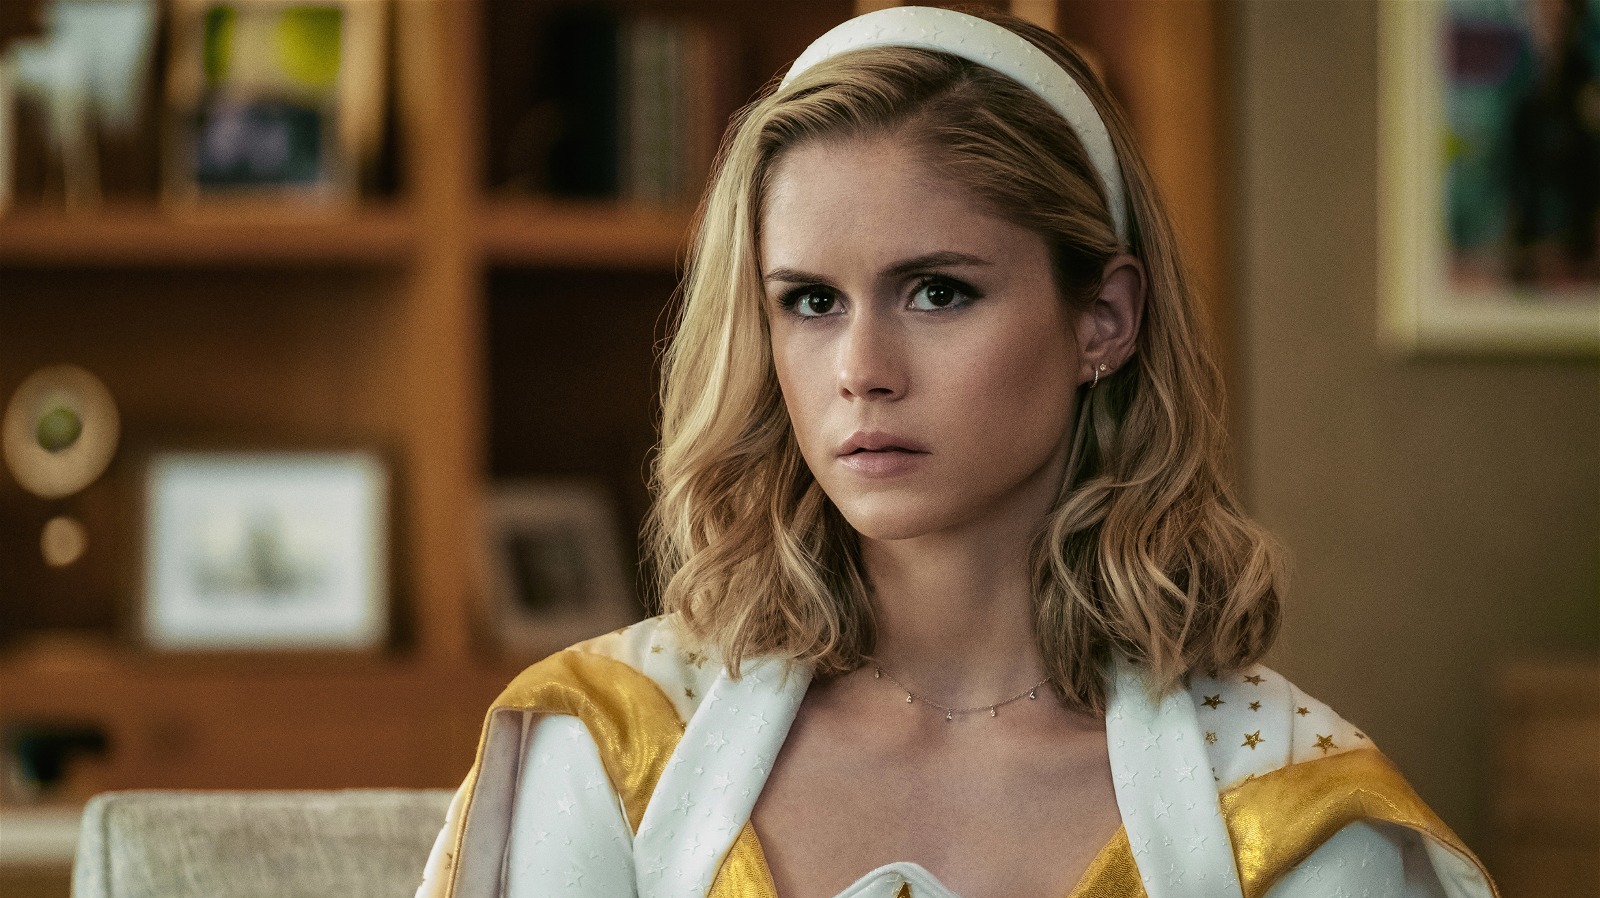 12 Best Erin Moriarty Movies And TV Shows, Ranked